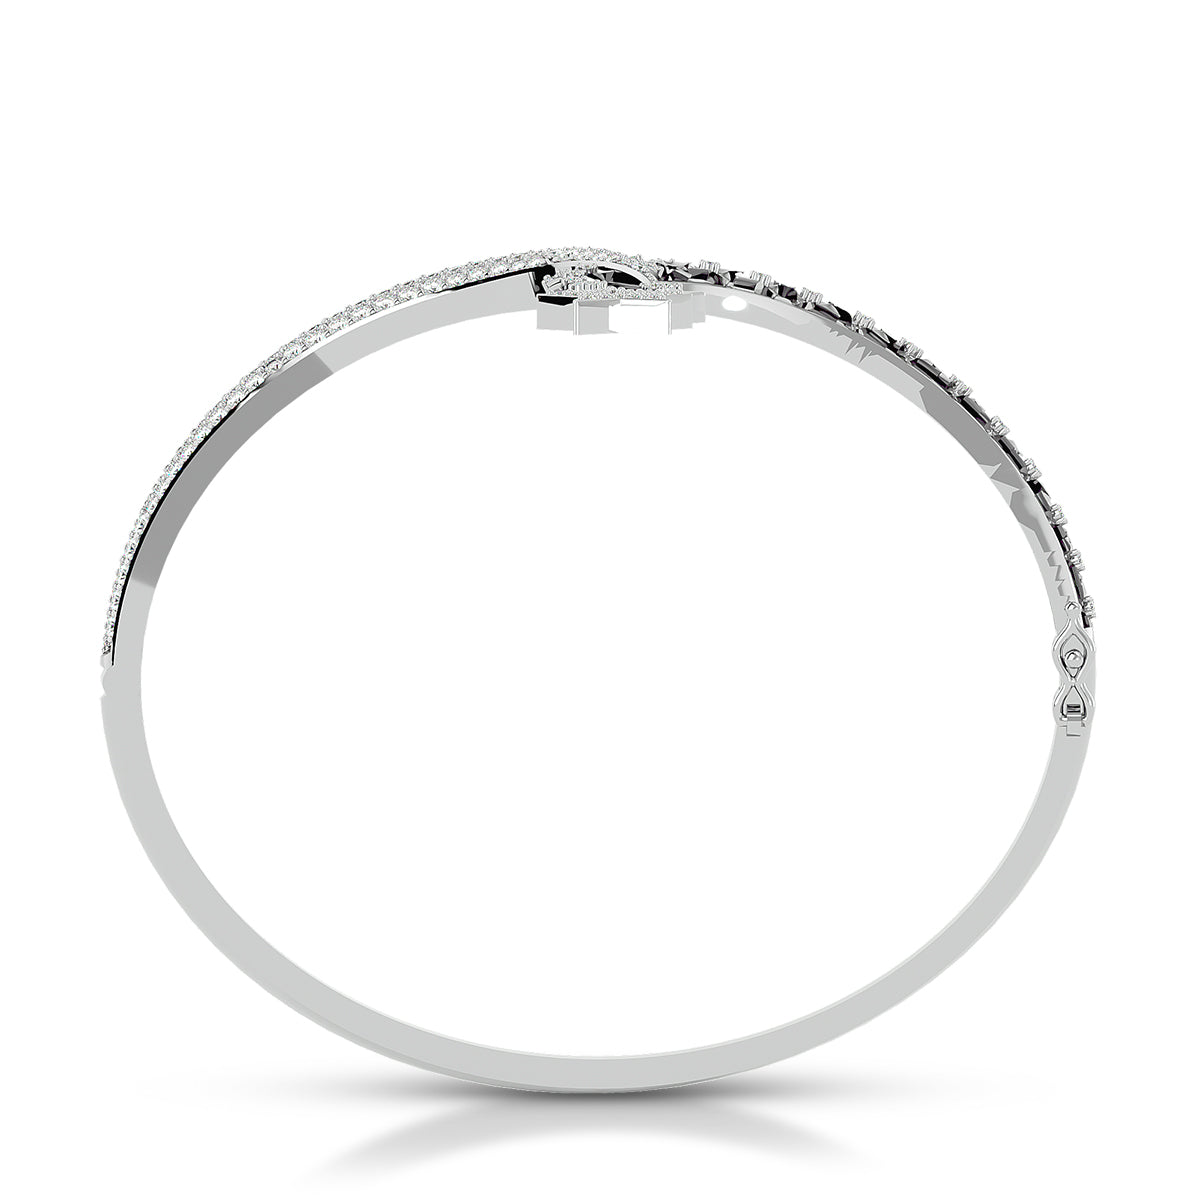 Connection Hinged Bangle White Gold With Diamonds